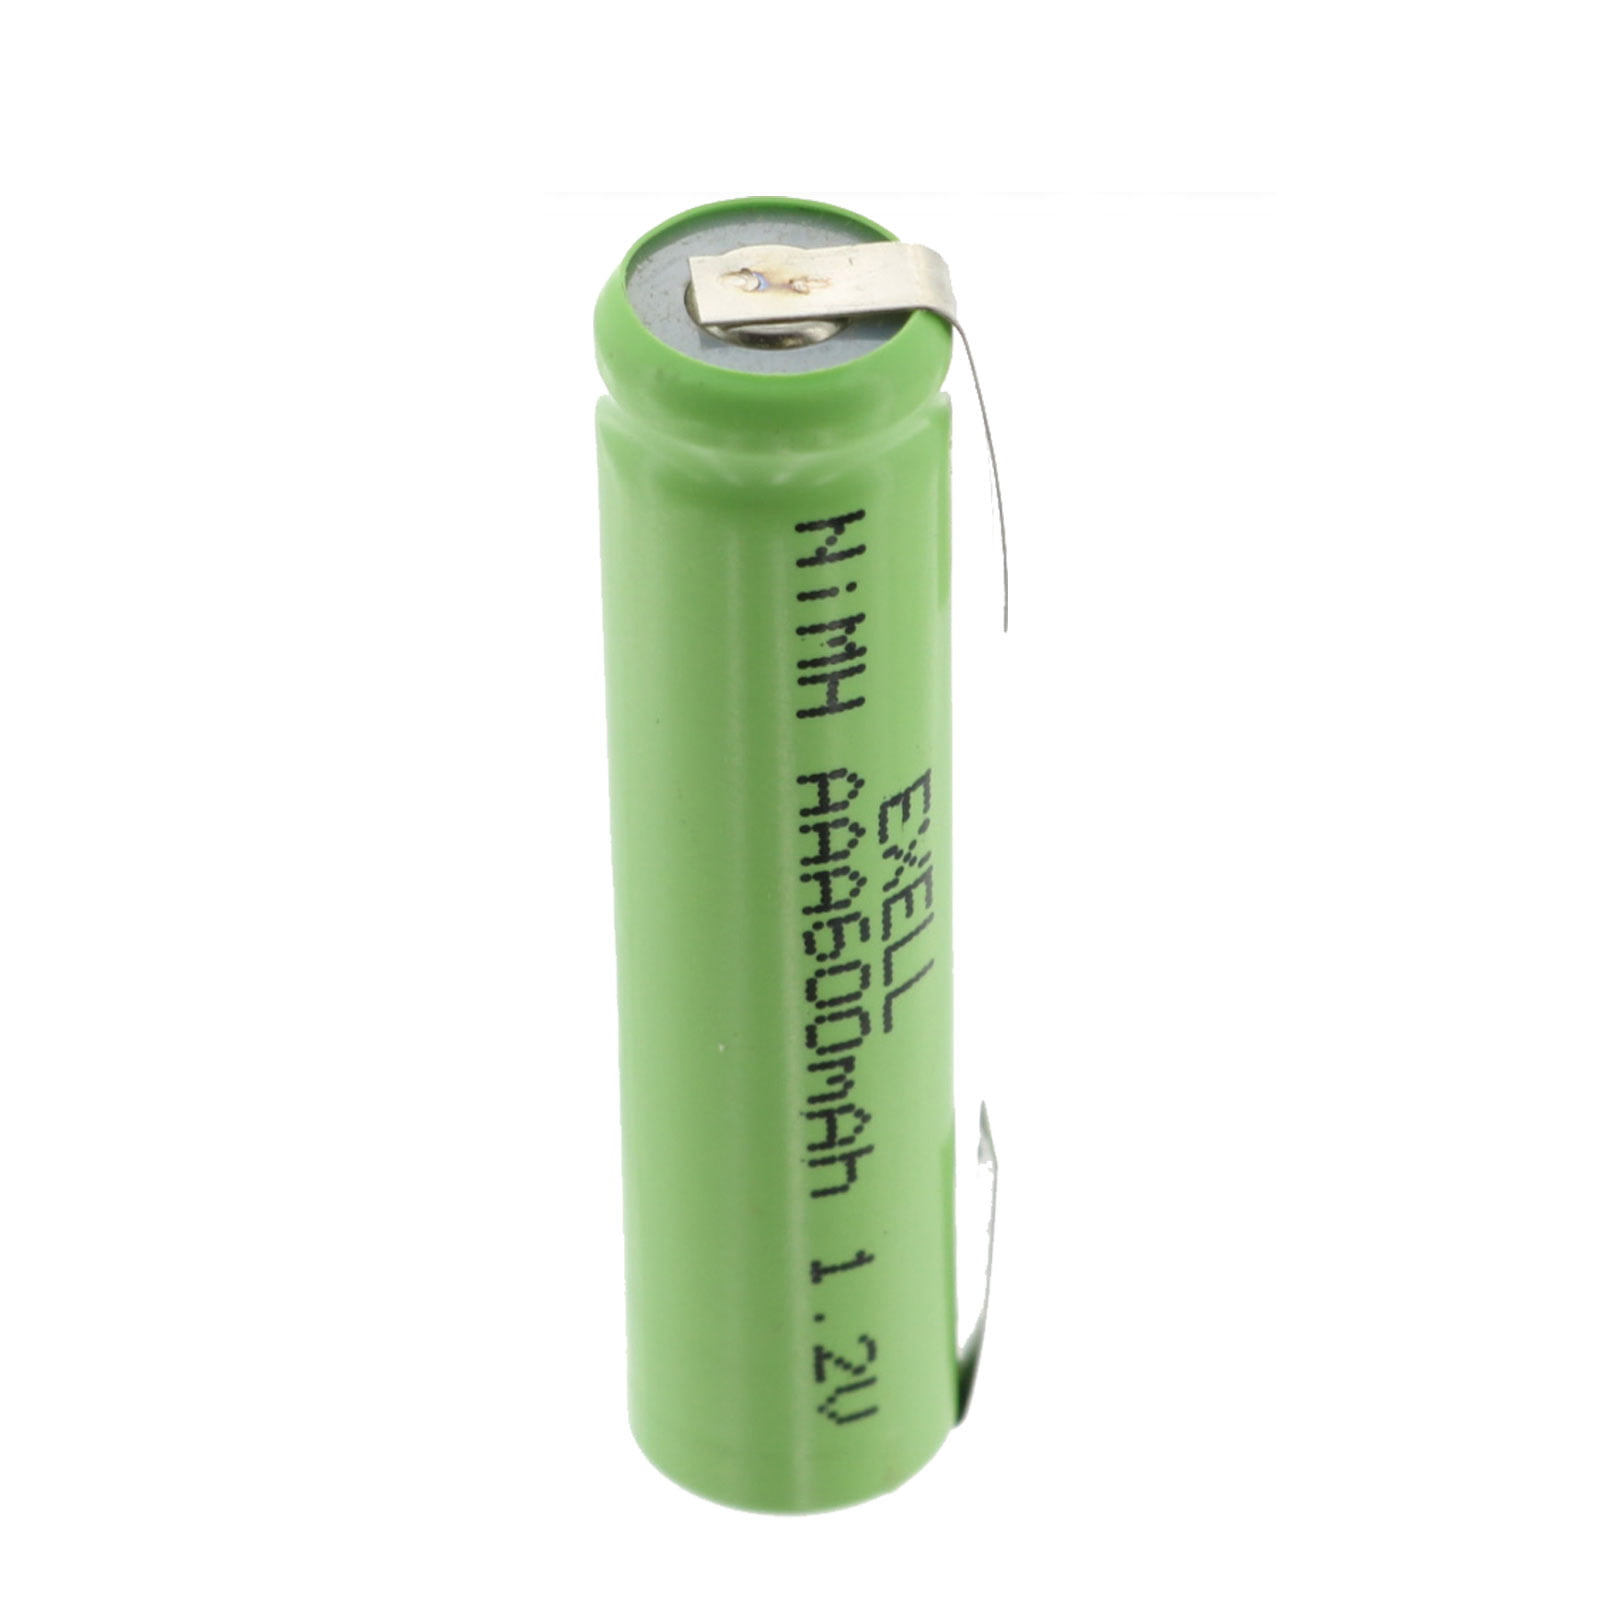 Rechargeable Batteries 1 2 V Rechargeable AAAA 600Mah Am6 Lr61 Ni-Mh Nimh Batteries 1 2V 4 Pcs